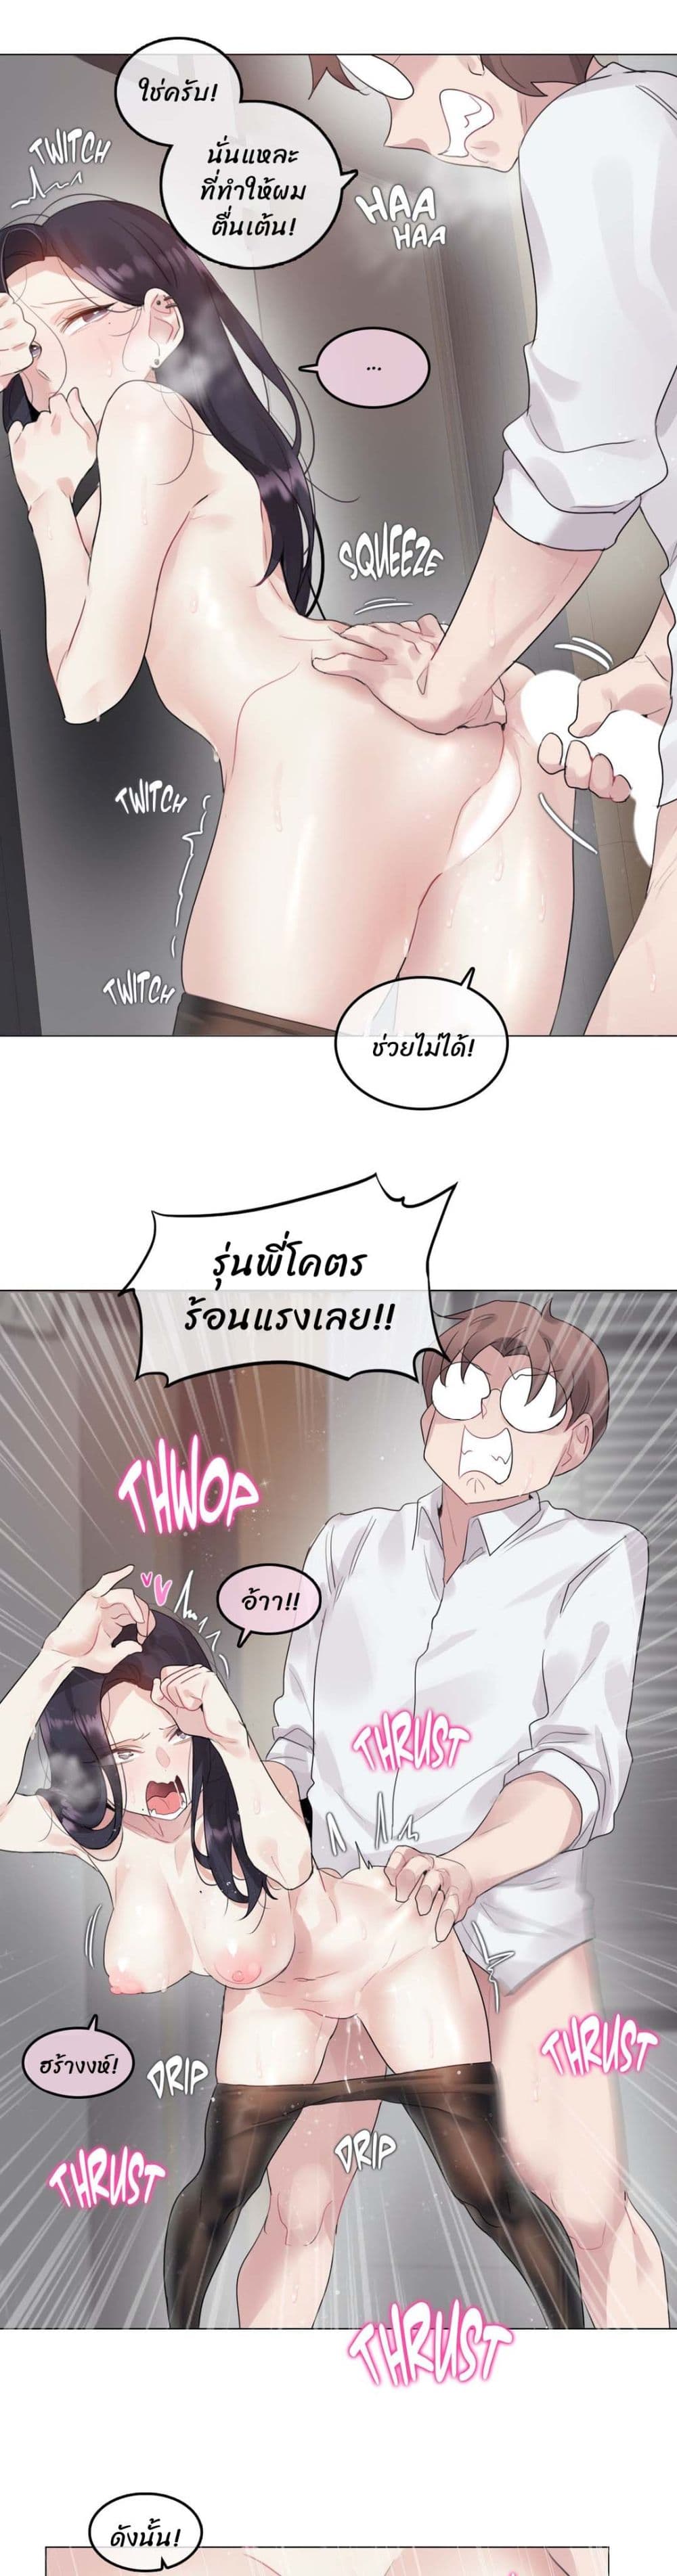 A Pervert's Daily Life 108-108